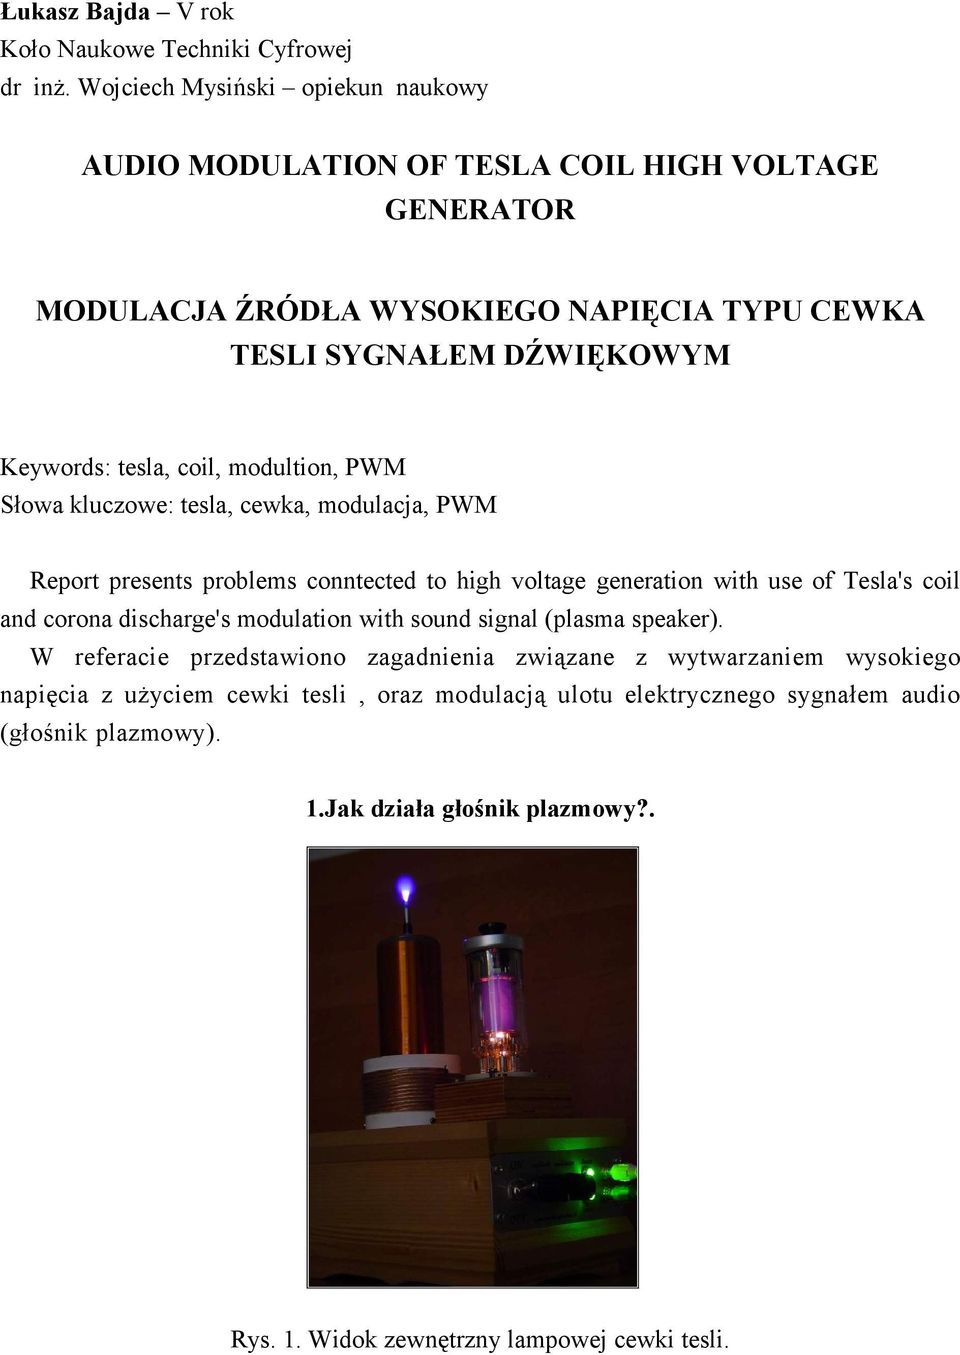 coil, modultion, PWM Słowa kluczowe: tesla, cewka, modulacja, PWM Report presents problems conntected to high voltage generation with use of Tesla's coil and corona discharge's